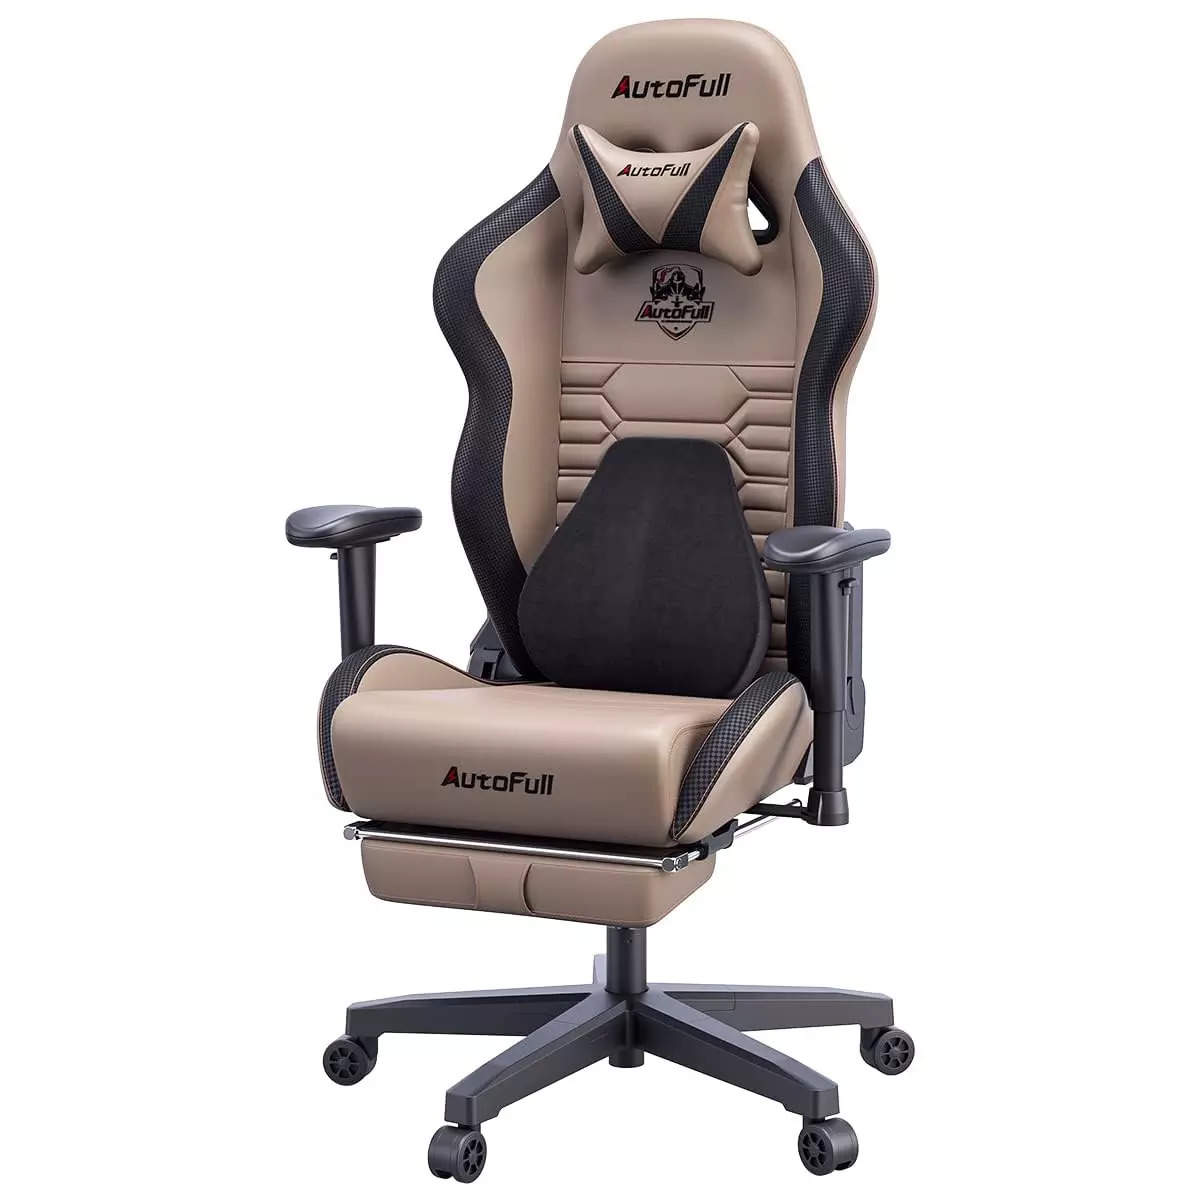 FREE Gaming Chair at Ocean State Job Lot after Crazy Deal 11/16